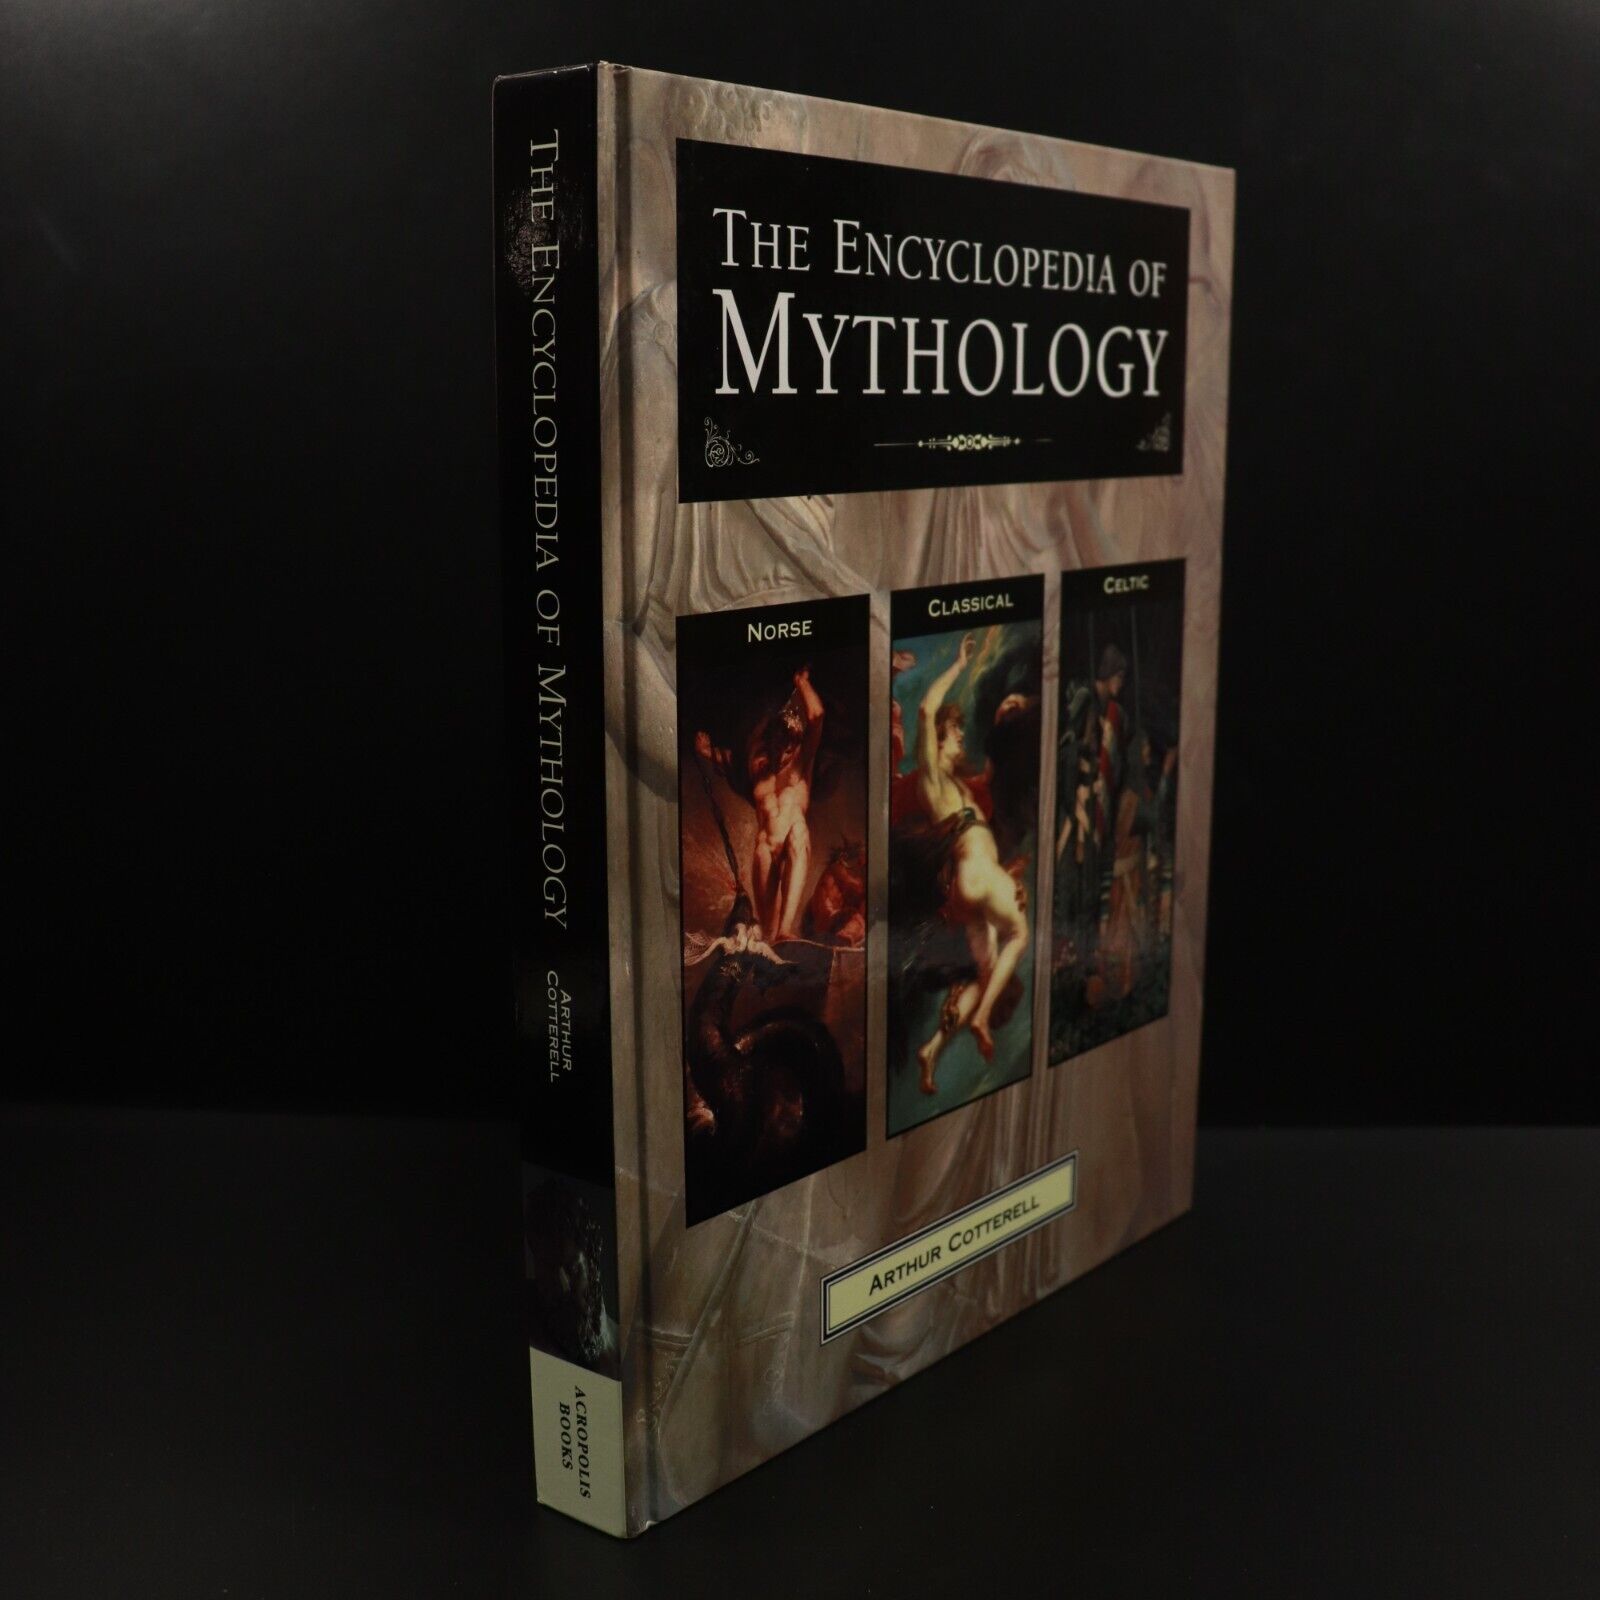 1996 The Encyclopedia Of Mythology Arthur Cotterell Classical Celtic Norse Book